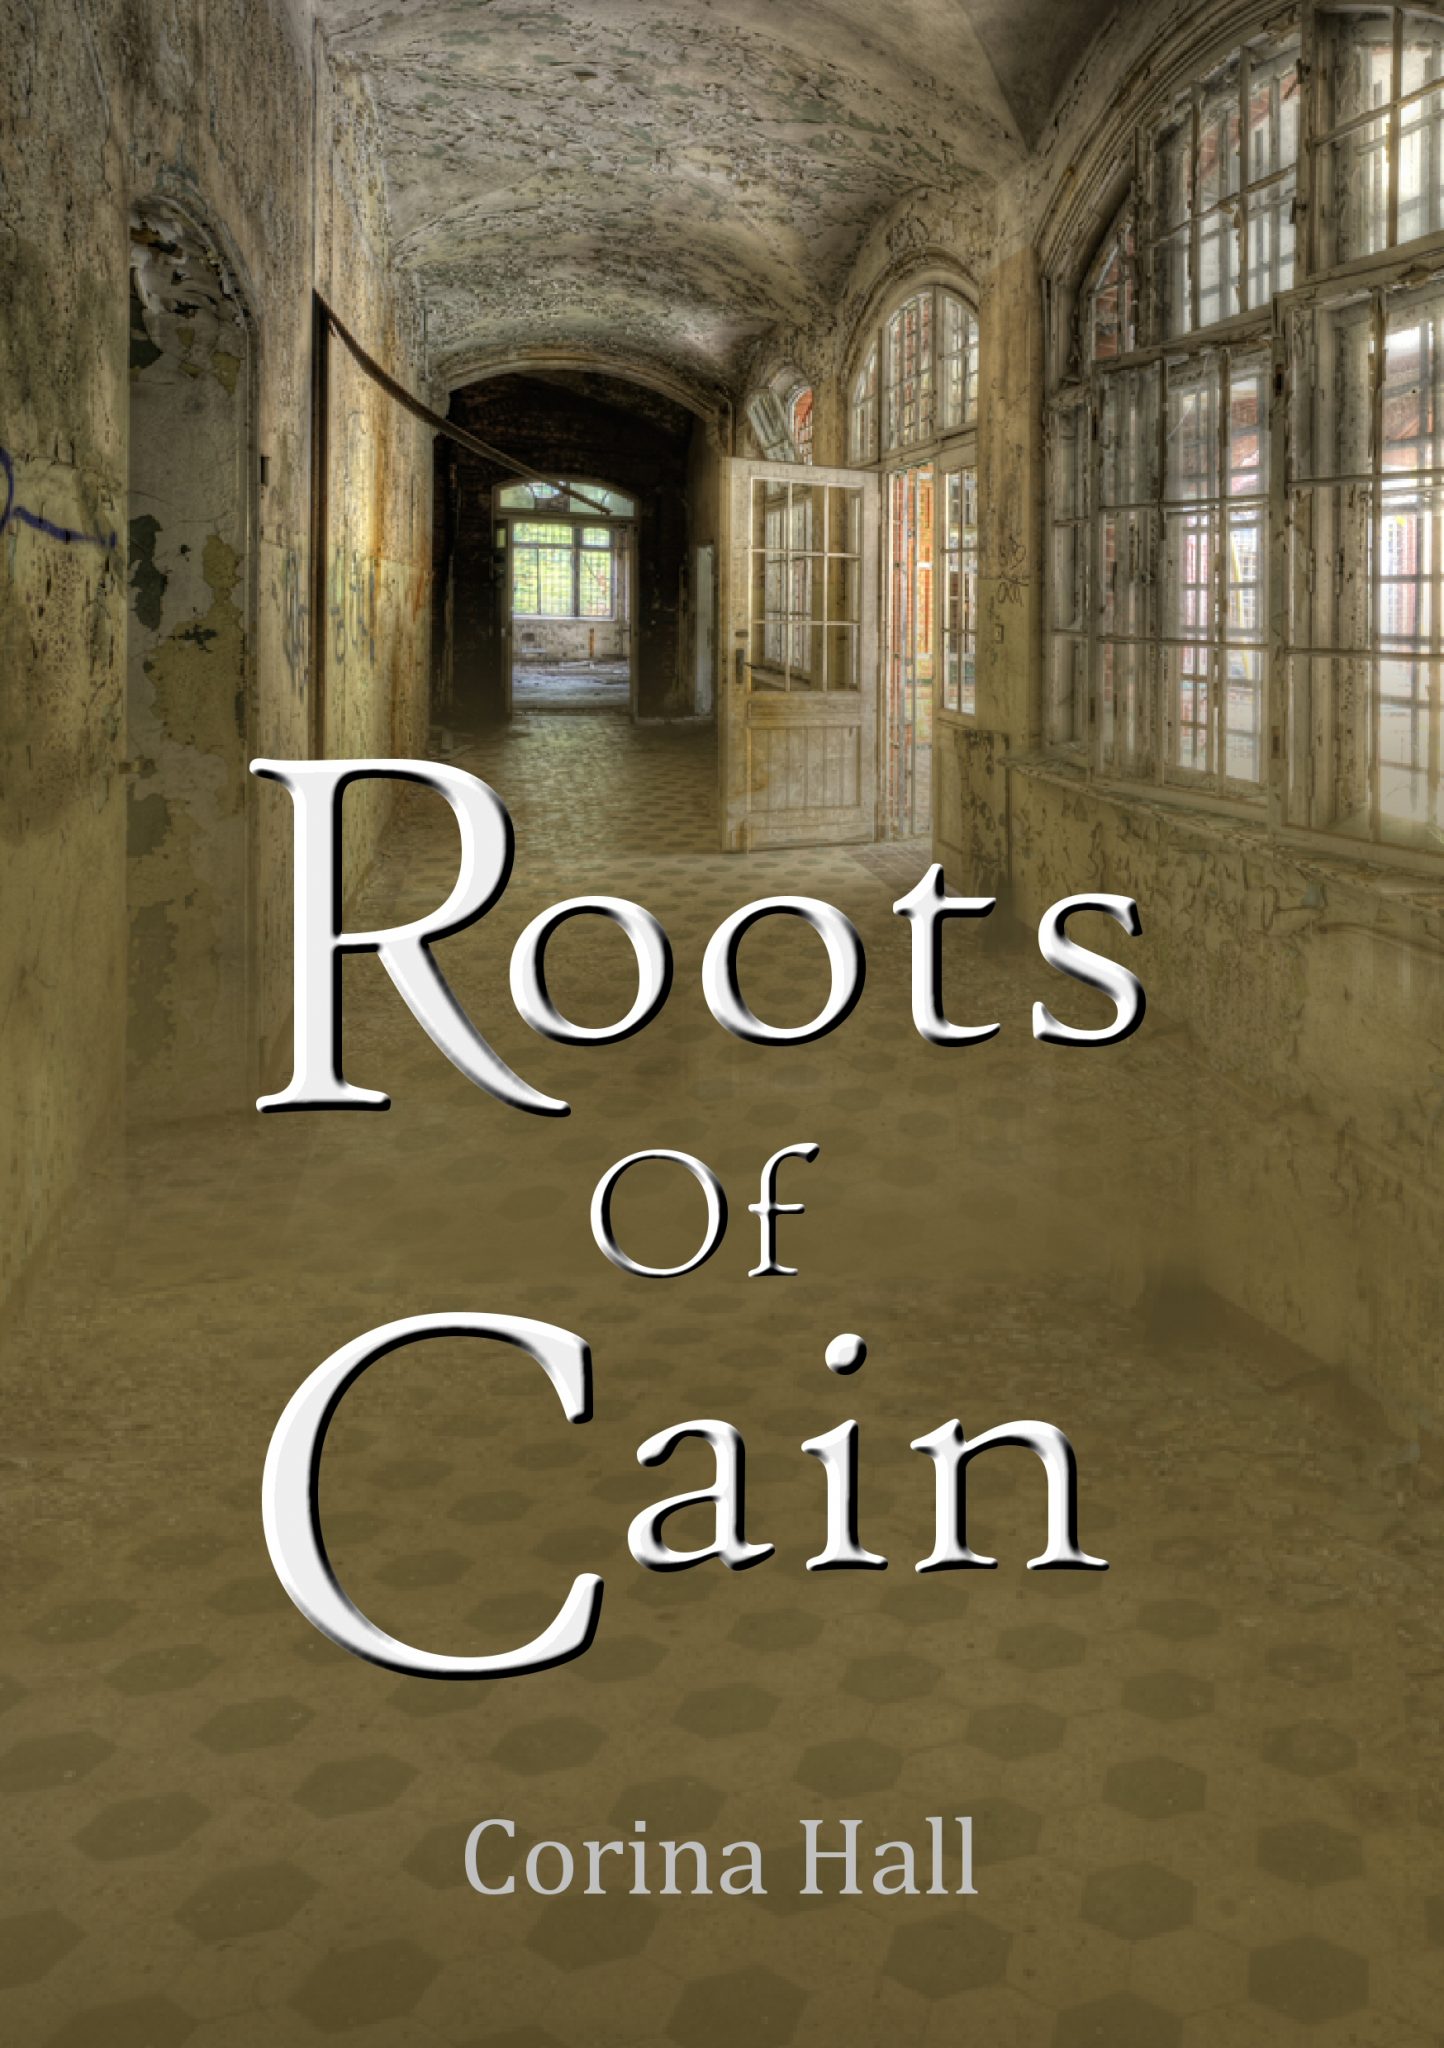 The front cover of Roots Of Cain